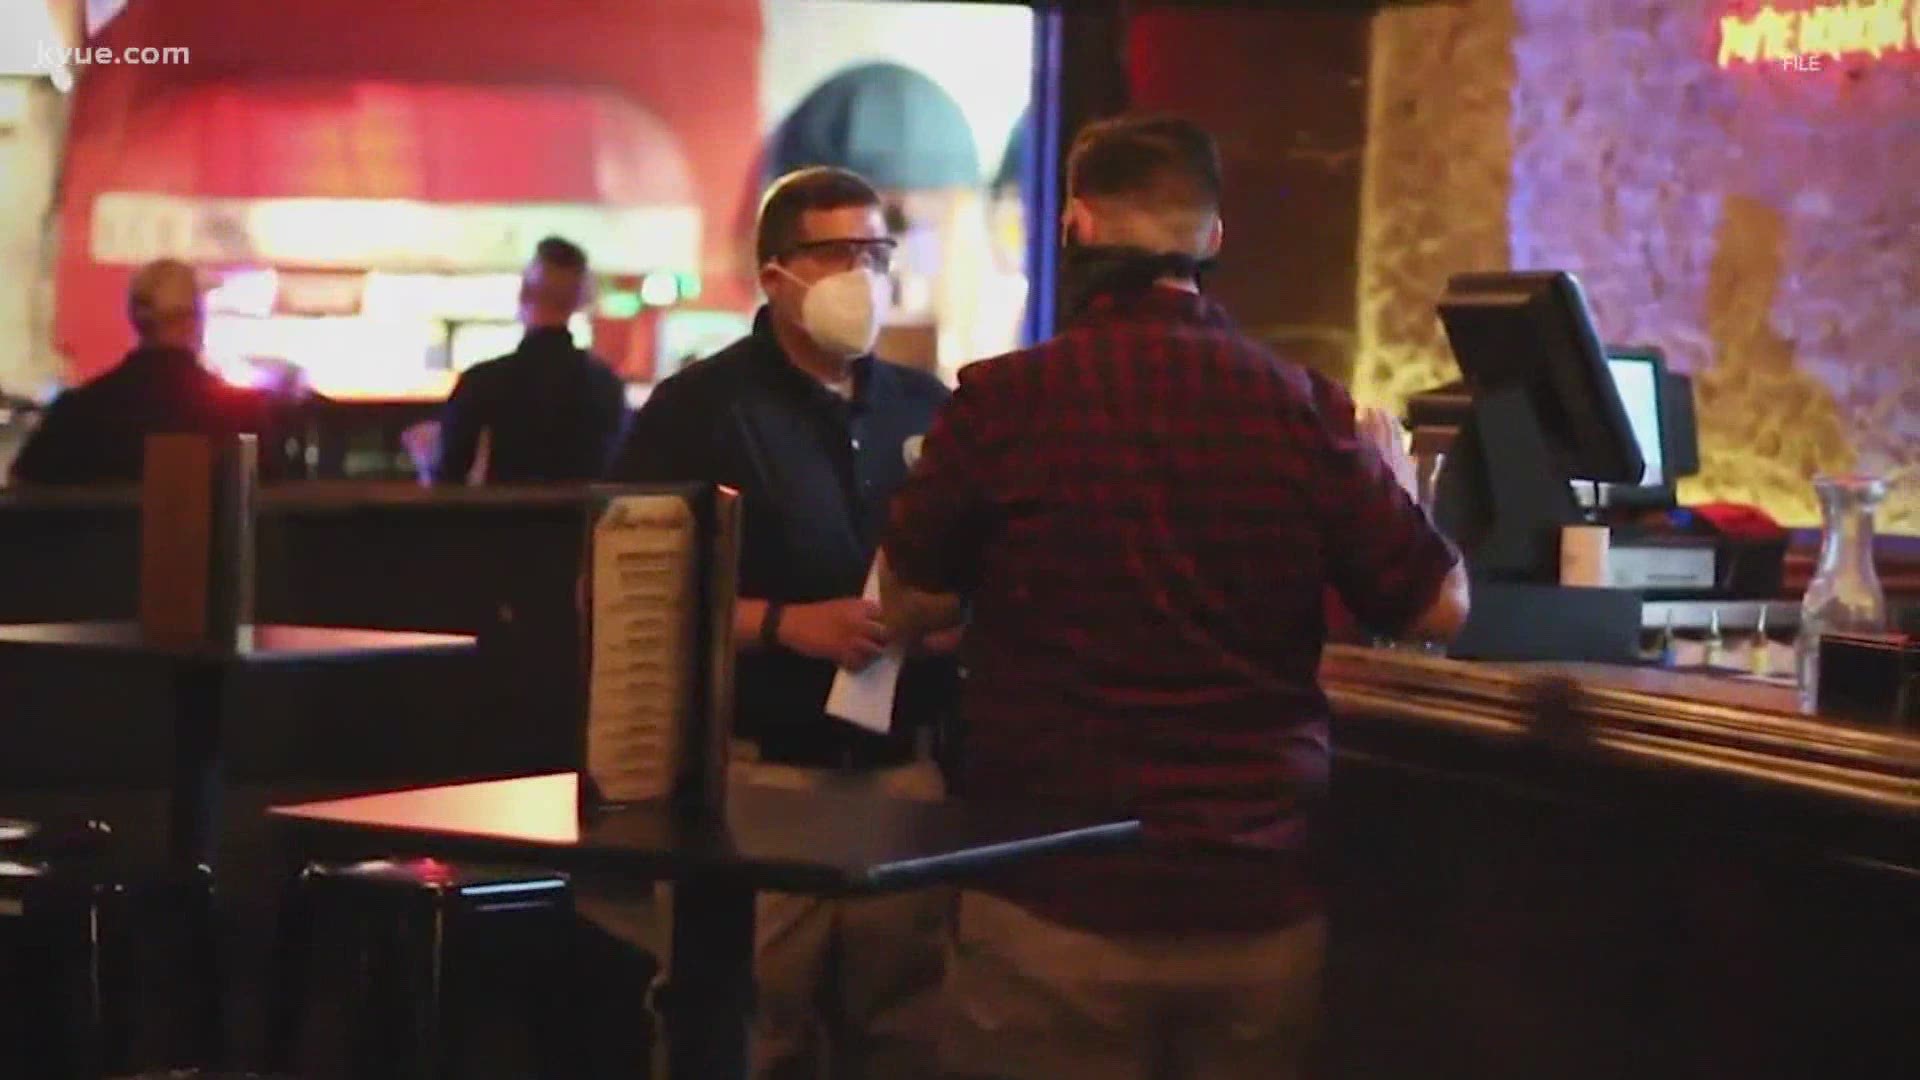 The TABC will be working statewide to make sure bars are not overserving or serving alcohol to minors at all.